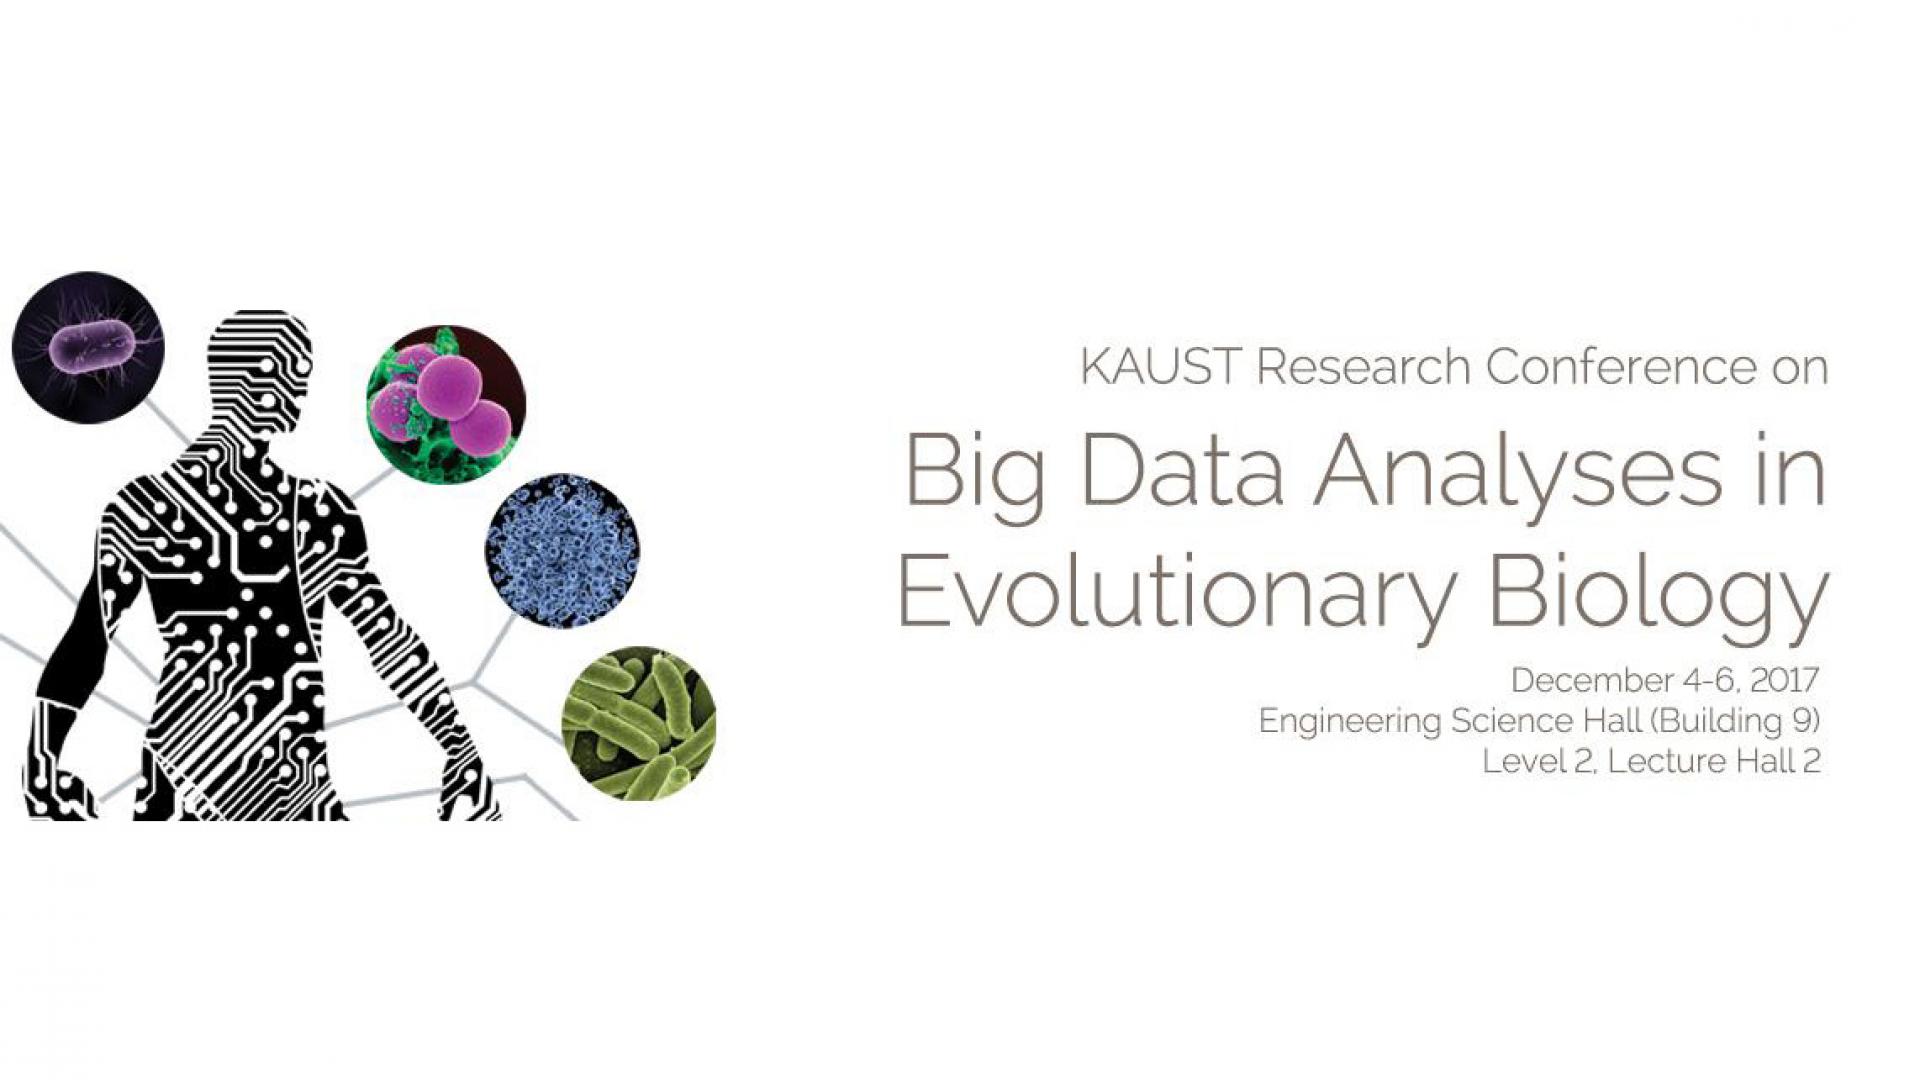 KAUST CEMSE BORG Big Data Analyses in Eveolutionary Biology Conference Announcement